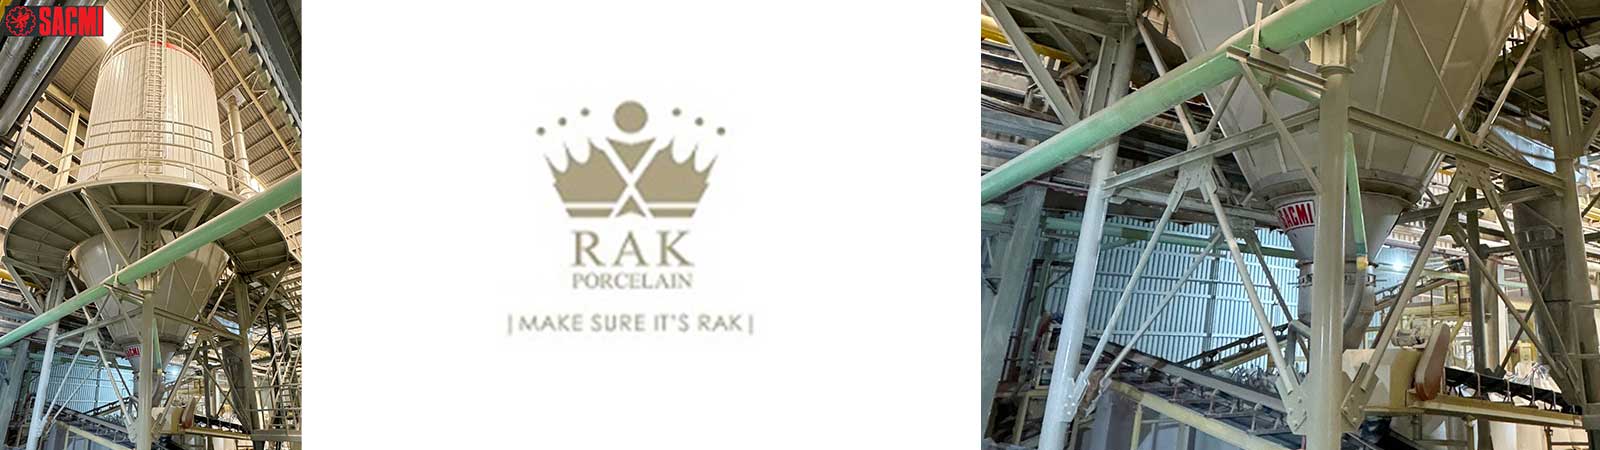 With SACMI technology, Rak Porcelain soars to 36 million pieces per year of top-quality tableware